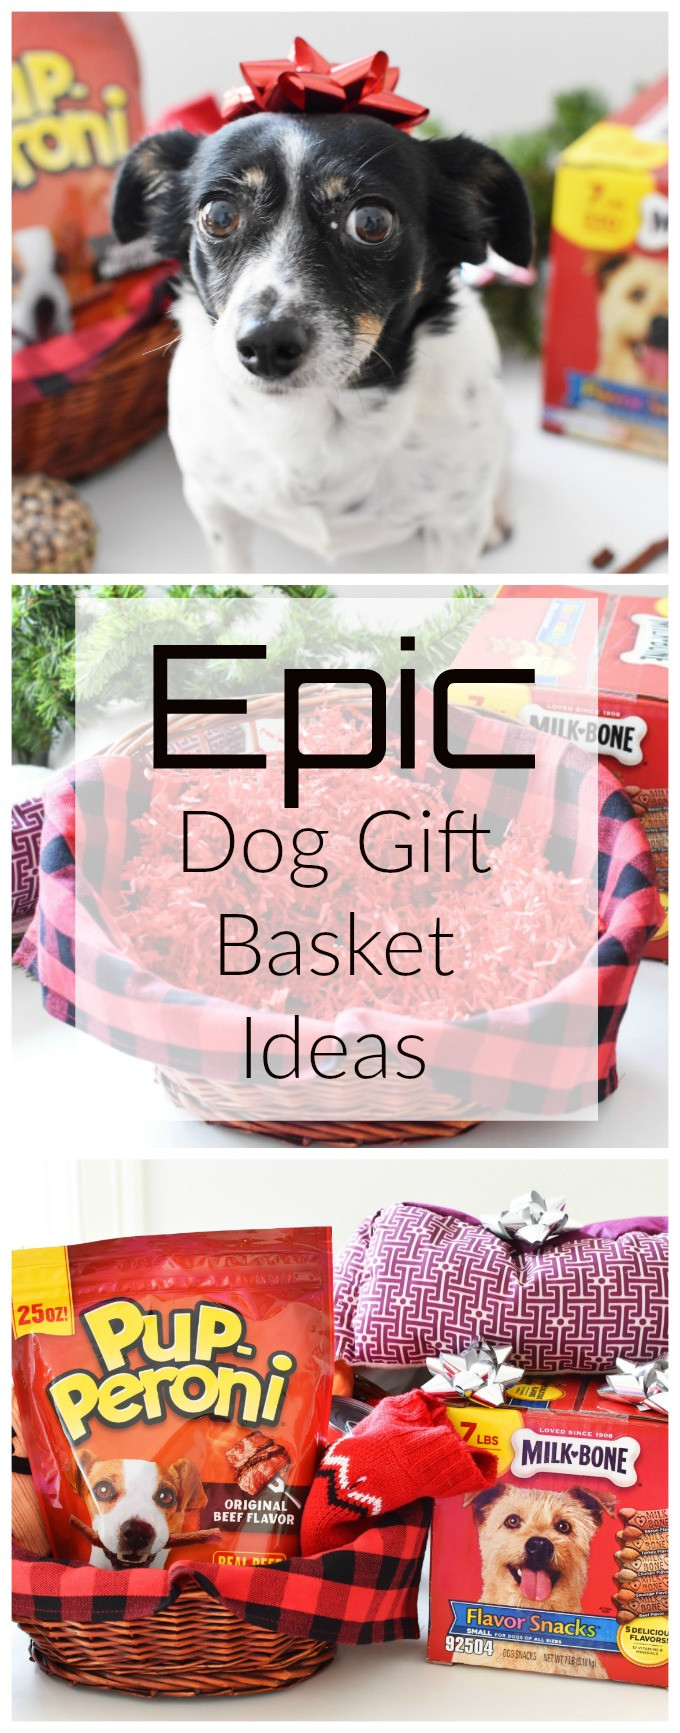 Pet Gift Basket Ideas
 How to Put To her An Epic Dog Gift Basket